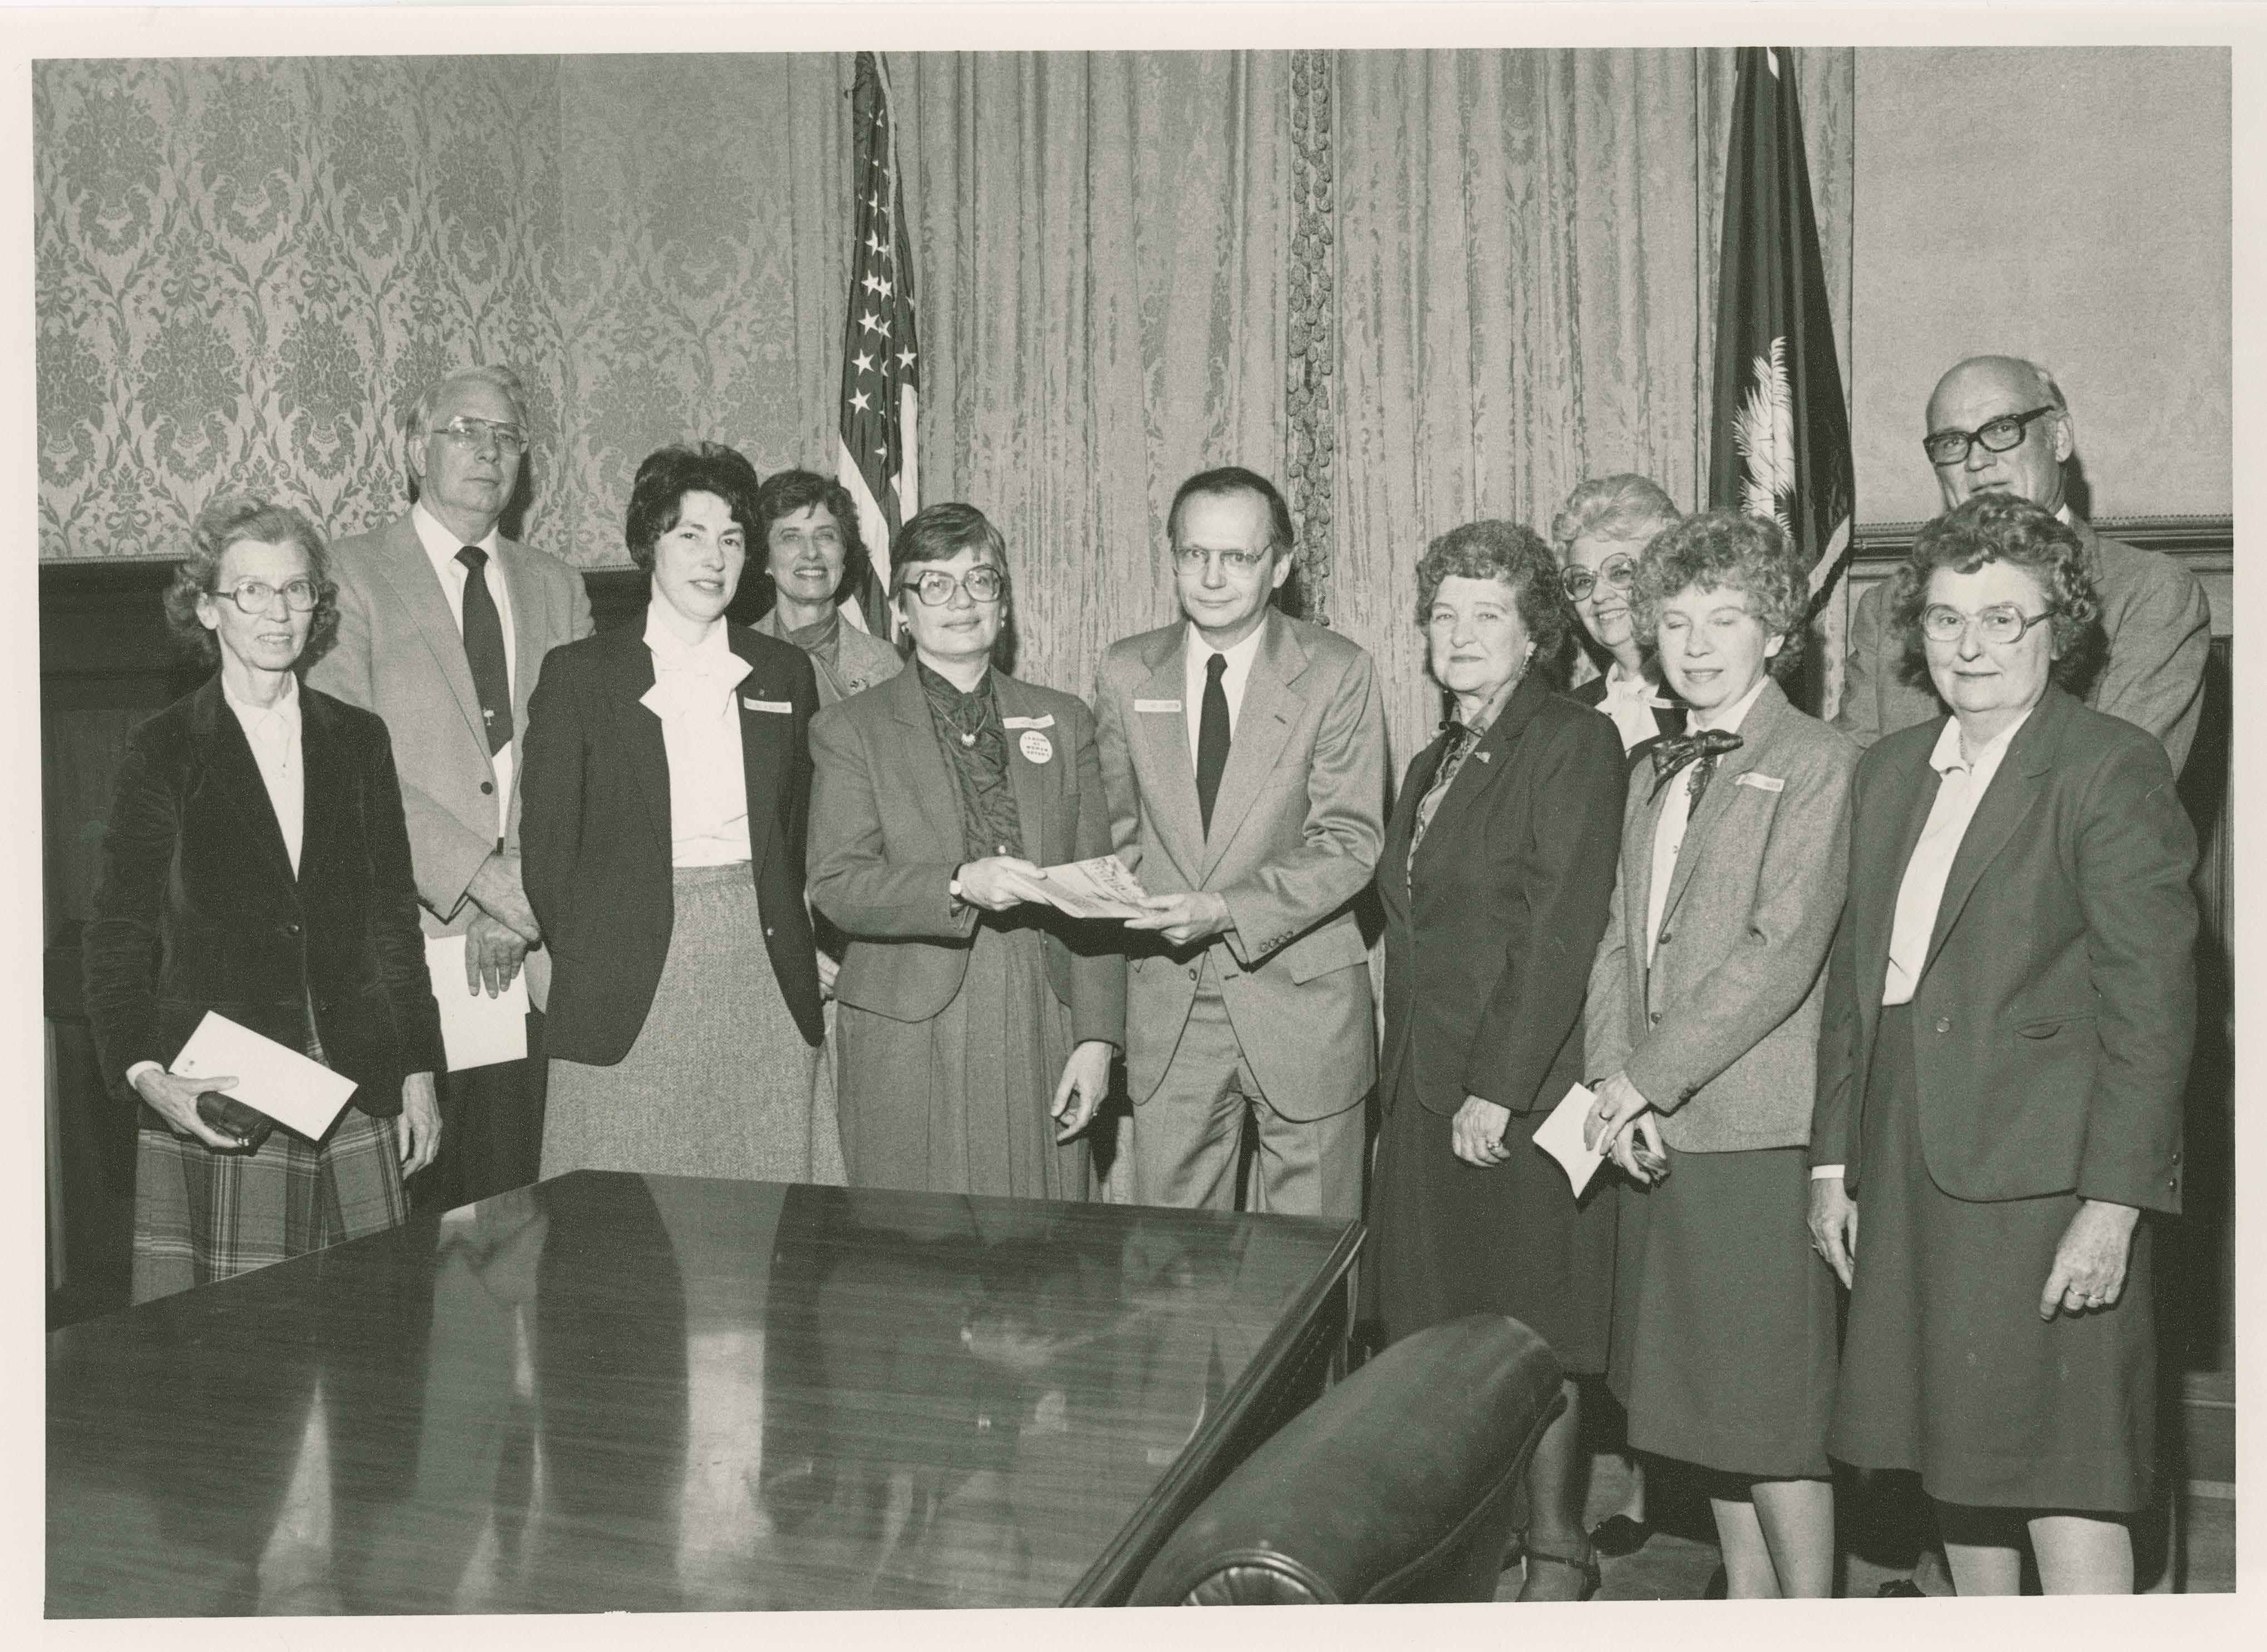 League president Linda Powers Bilanchone presents updated Know Your State to Governor Richard Riley, 1984